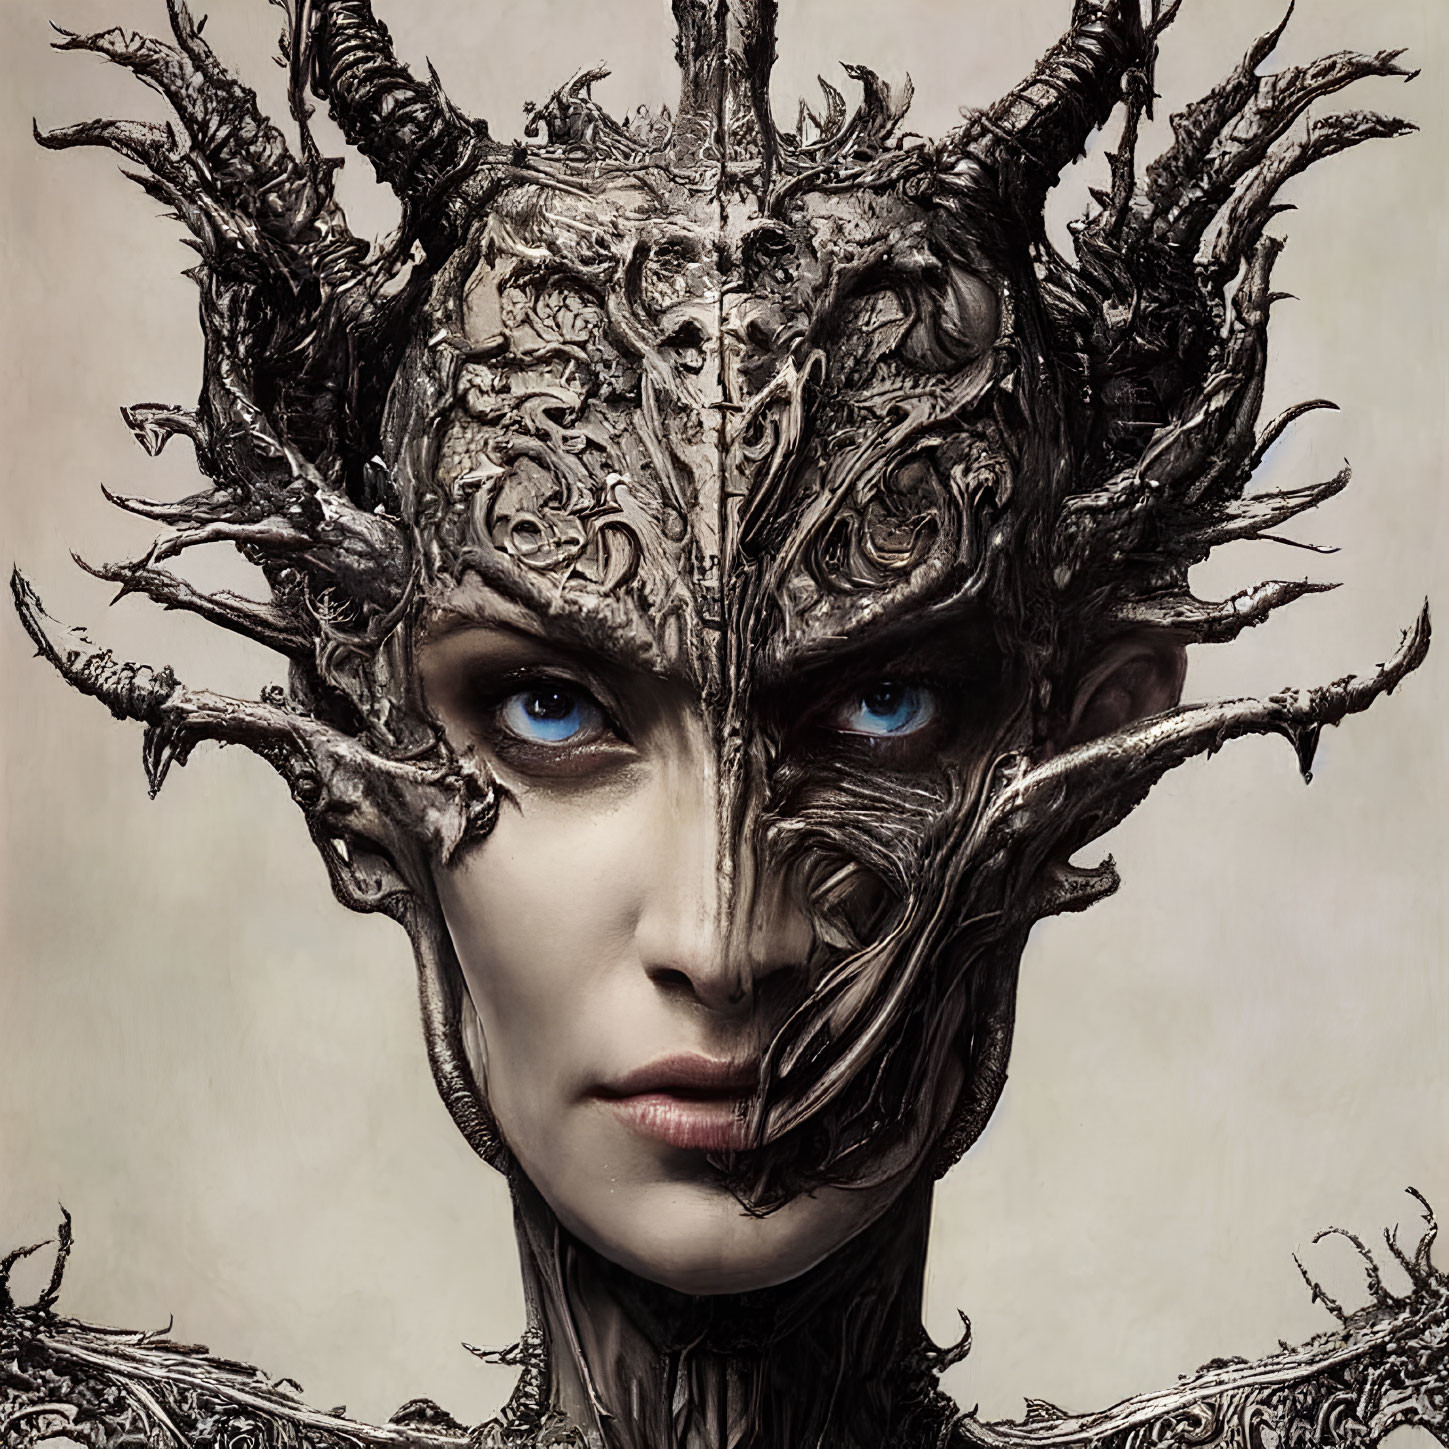 Person wearing ornate metallic headpiece with blue eyes and fantastical features